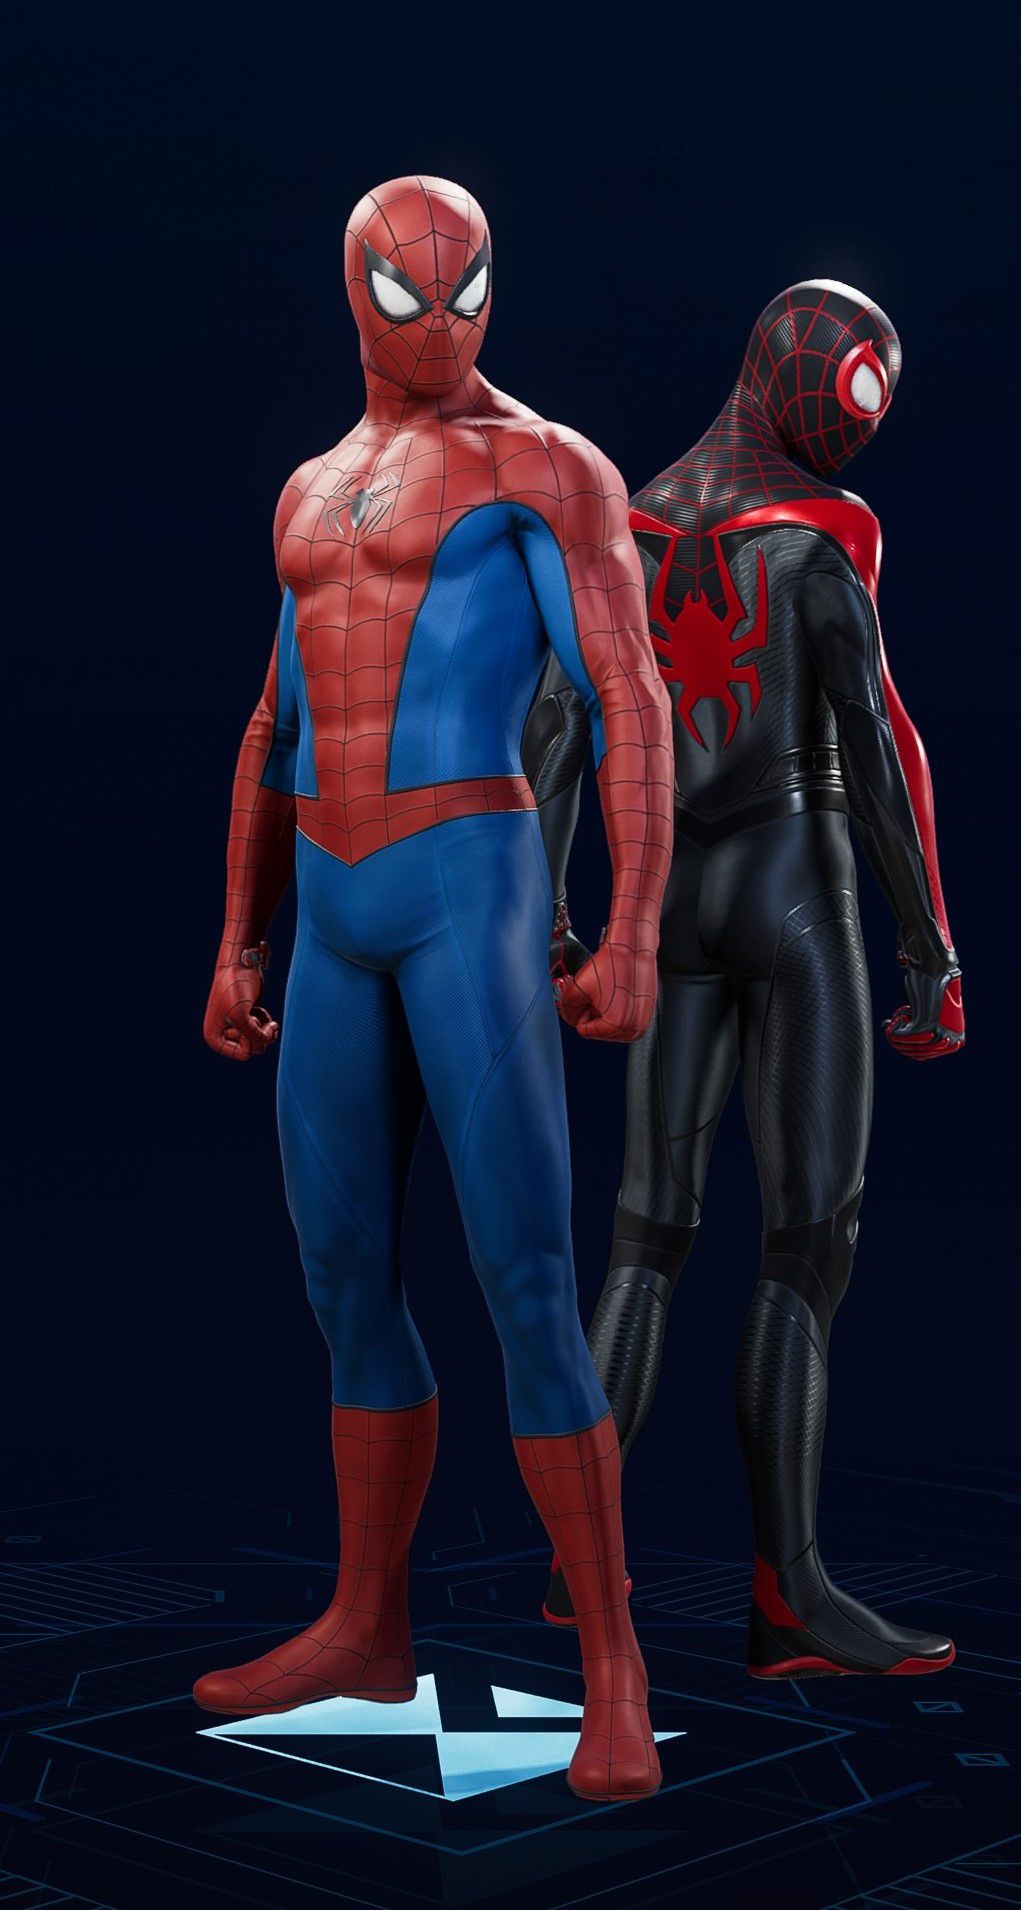 Peter Parker stands in his Classic Suit in the suit selection screen of Spider-Man 2.